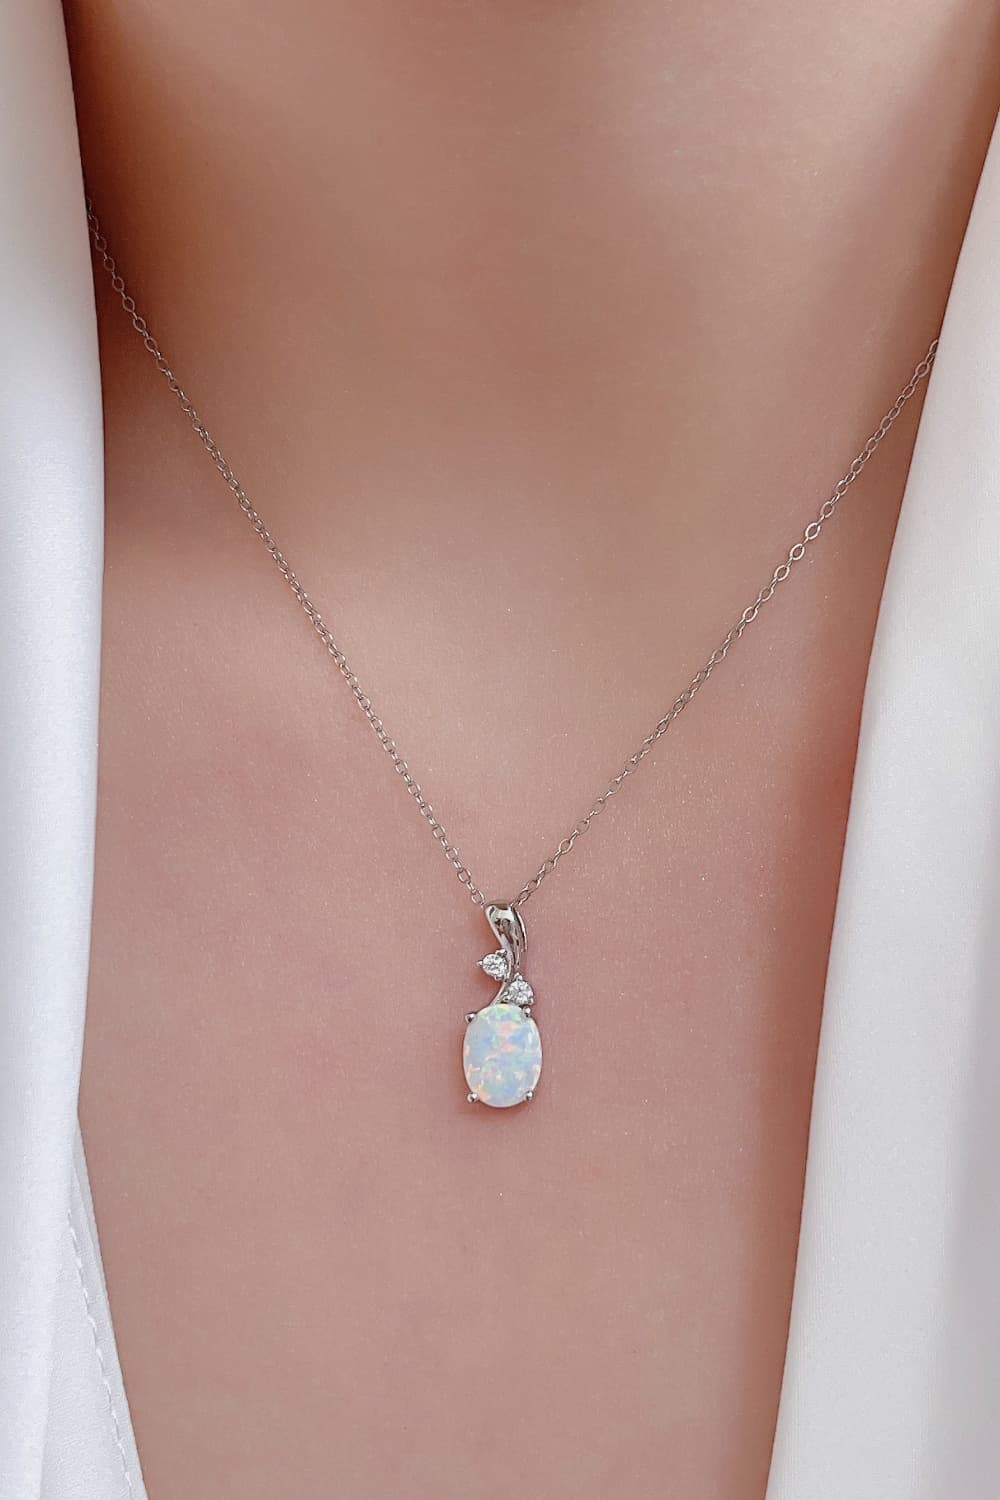 Opal Oval Pendant Chain Necklace - Tophatter Shopping Deals - Electronics, Jewelry, Auction, App, Bidding, Gadgets, Fashion